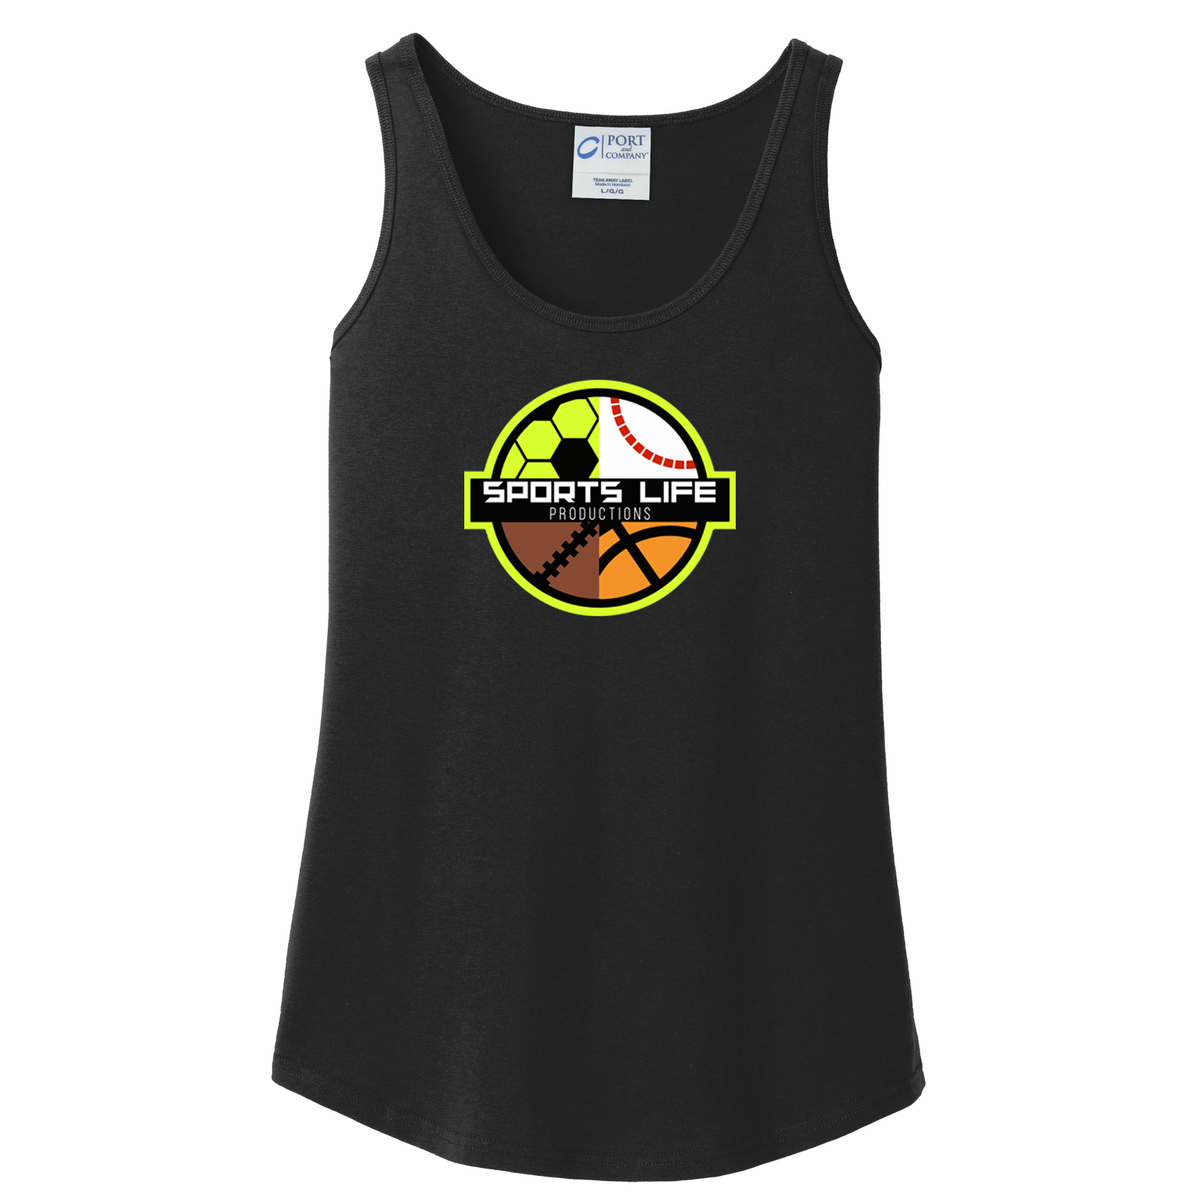 Sports Life Productions Women's Tank Top